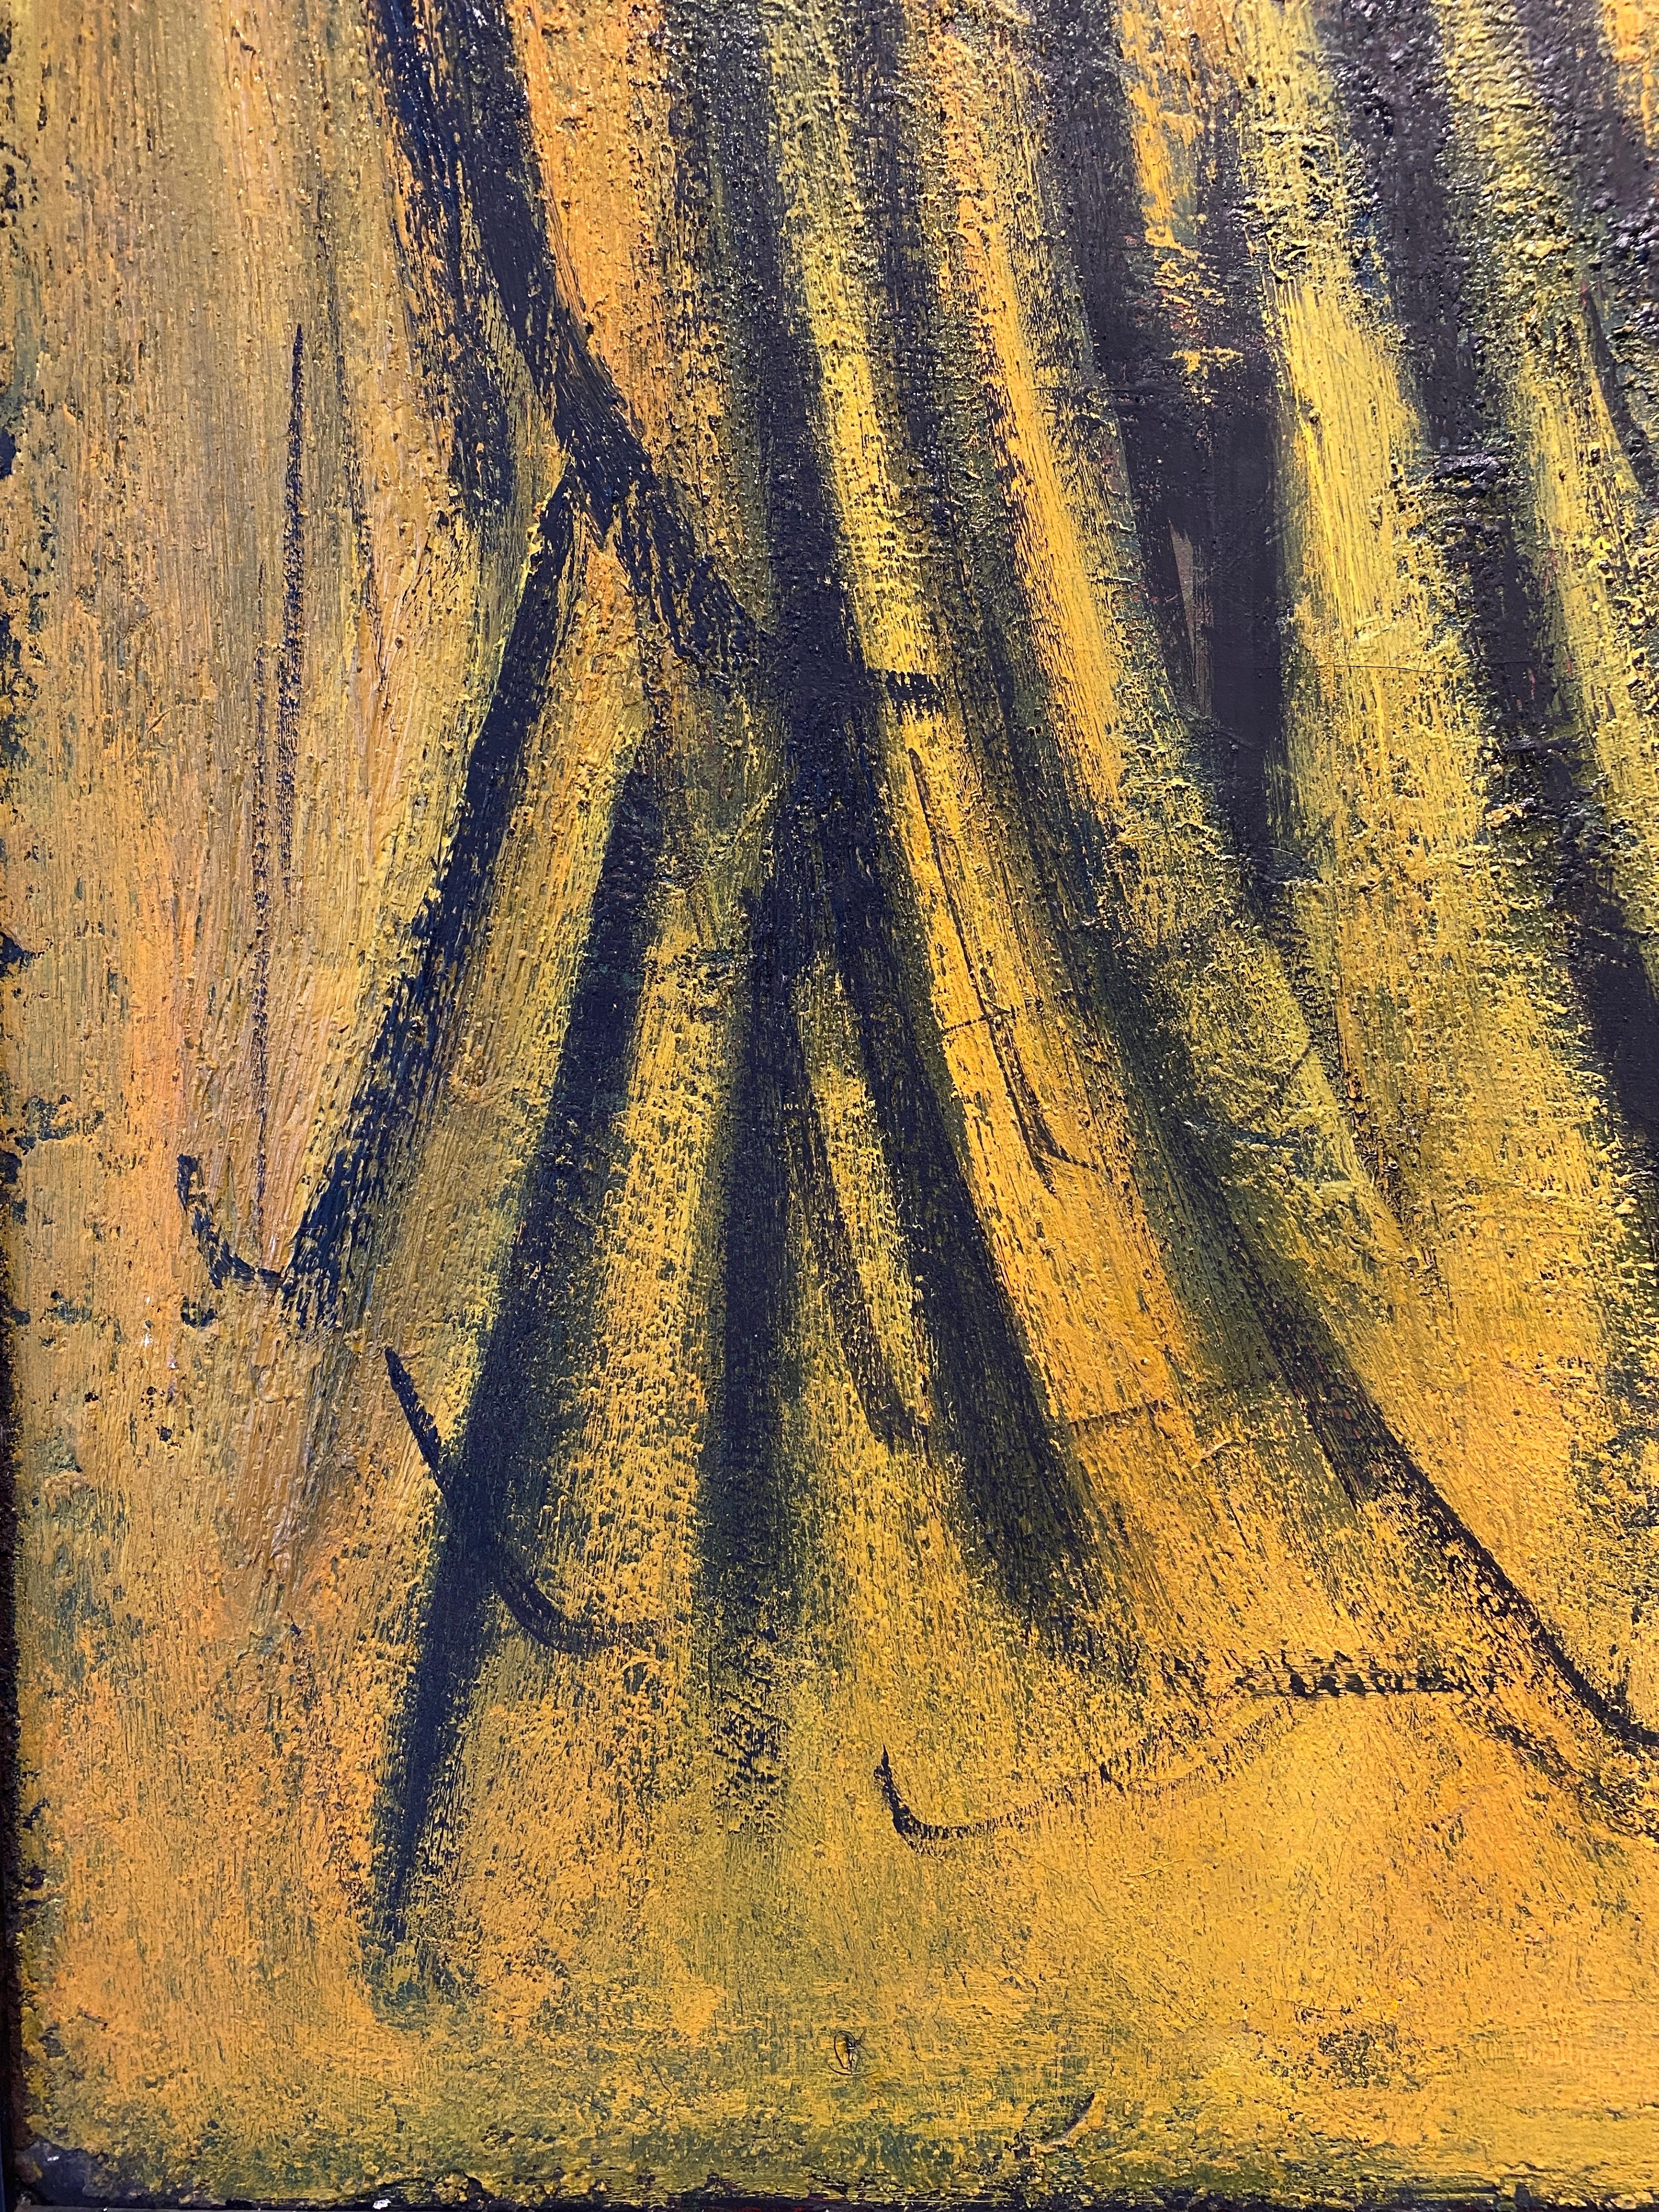 Abstract painting from the 1950s
French work in the style of Hans Hartung

Signature present to identified.
 